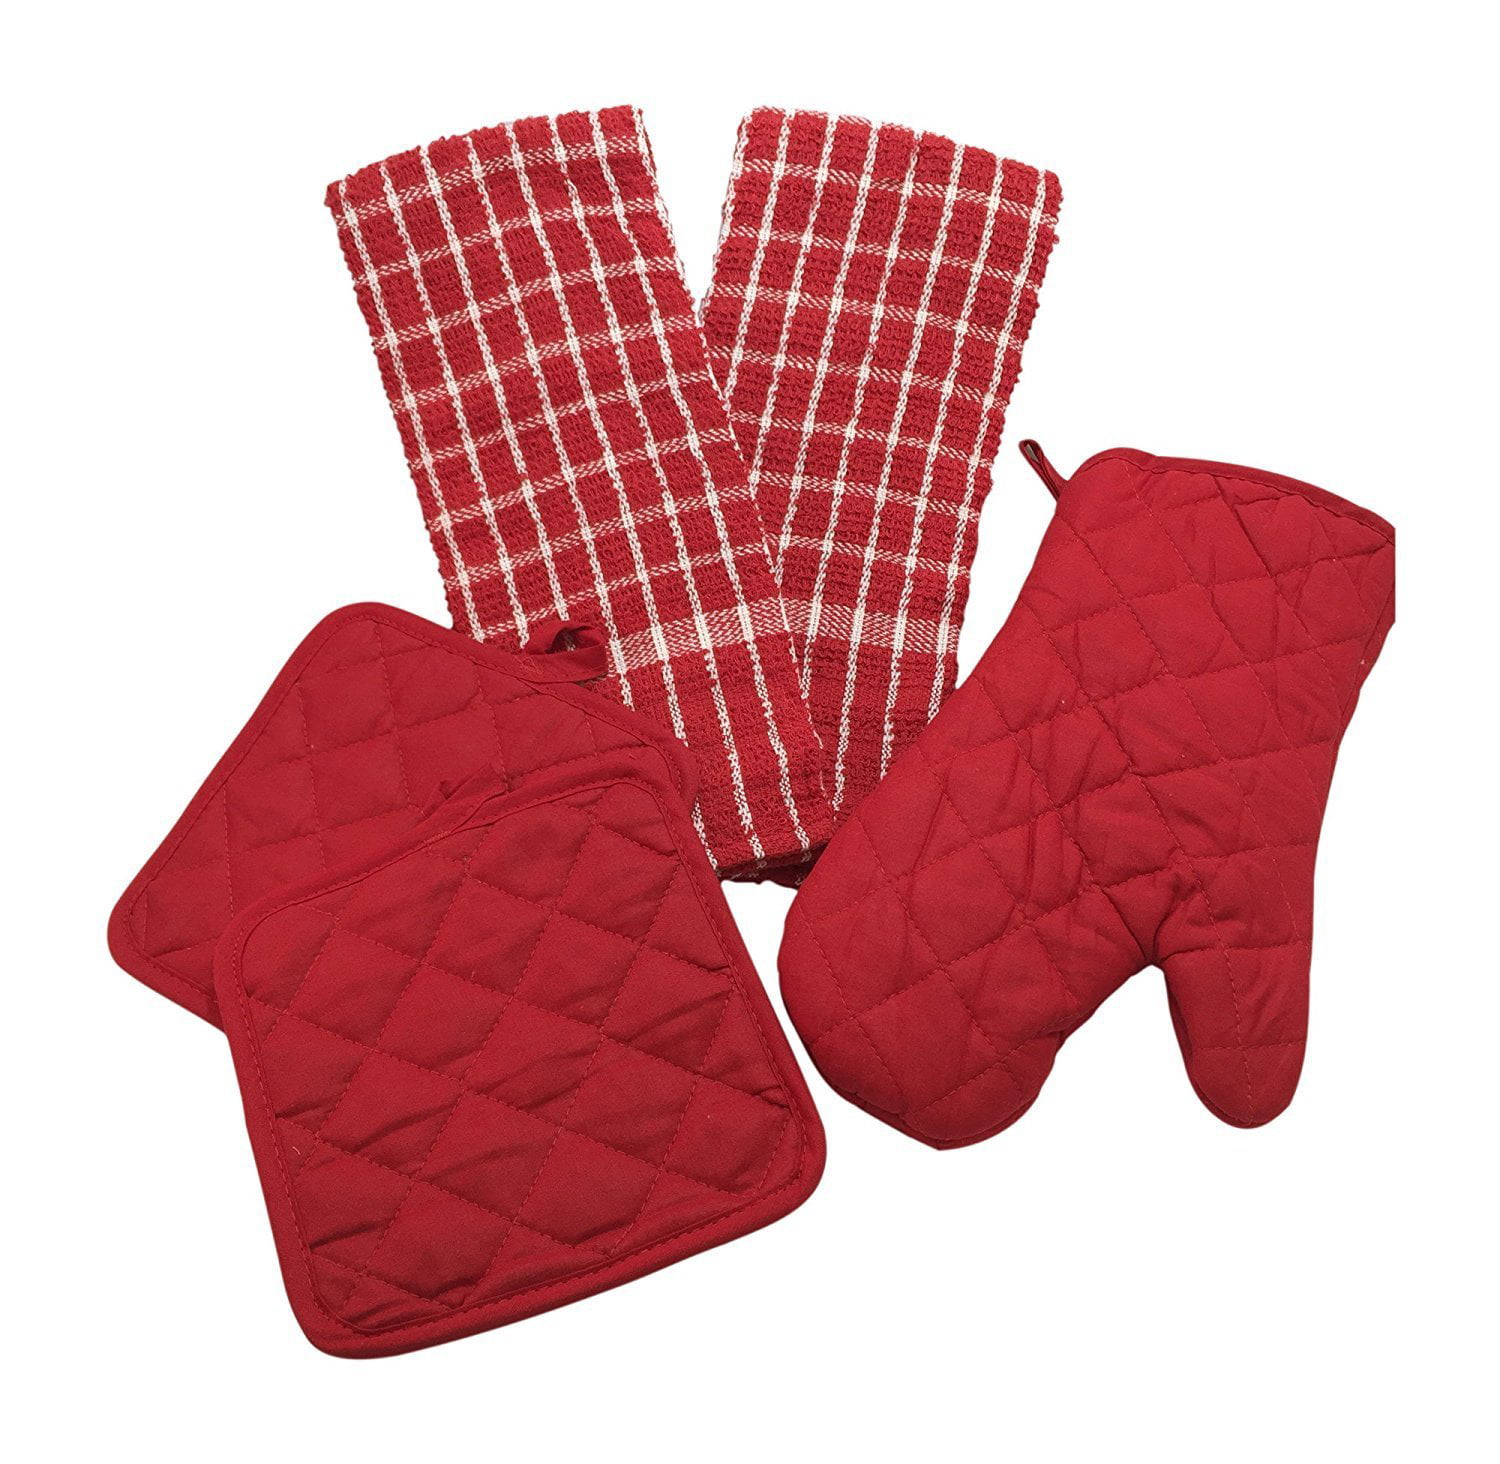 Greenbrier Red Check Kitchen Linen Set of 5 pieces Includes Potholders Oven Mitt Dish Towels 